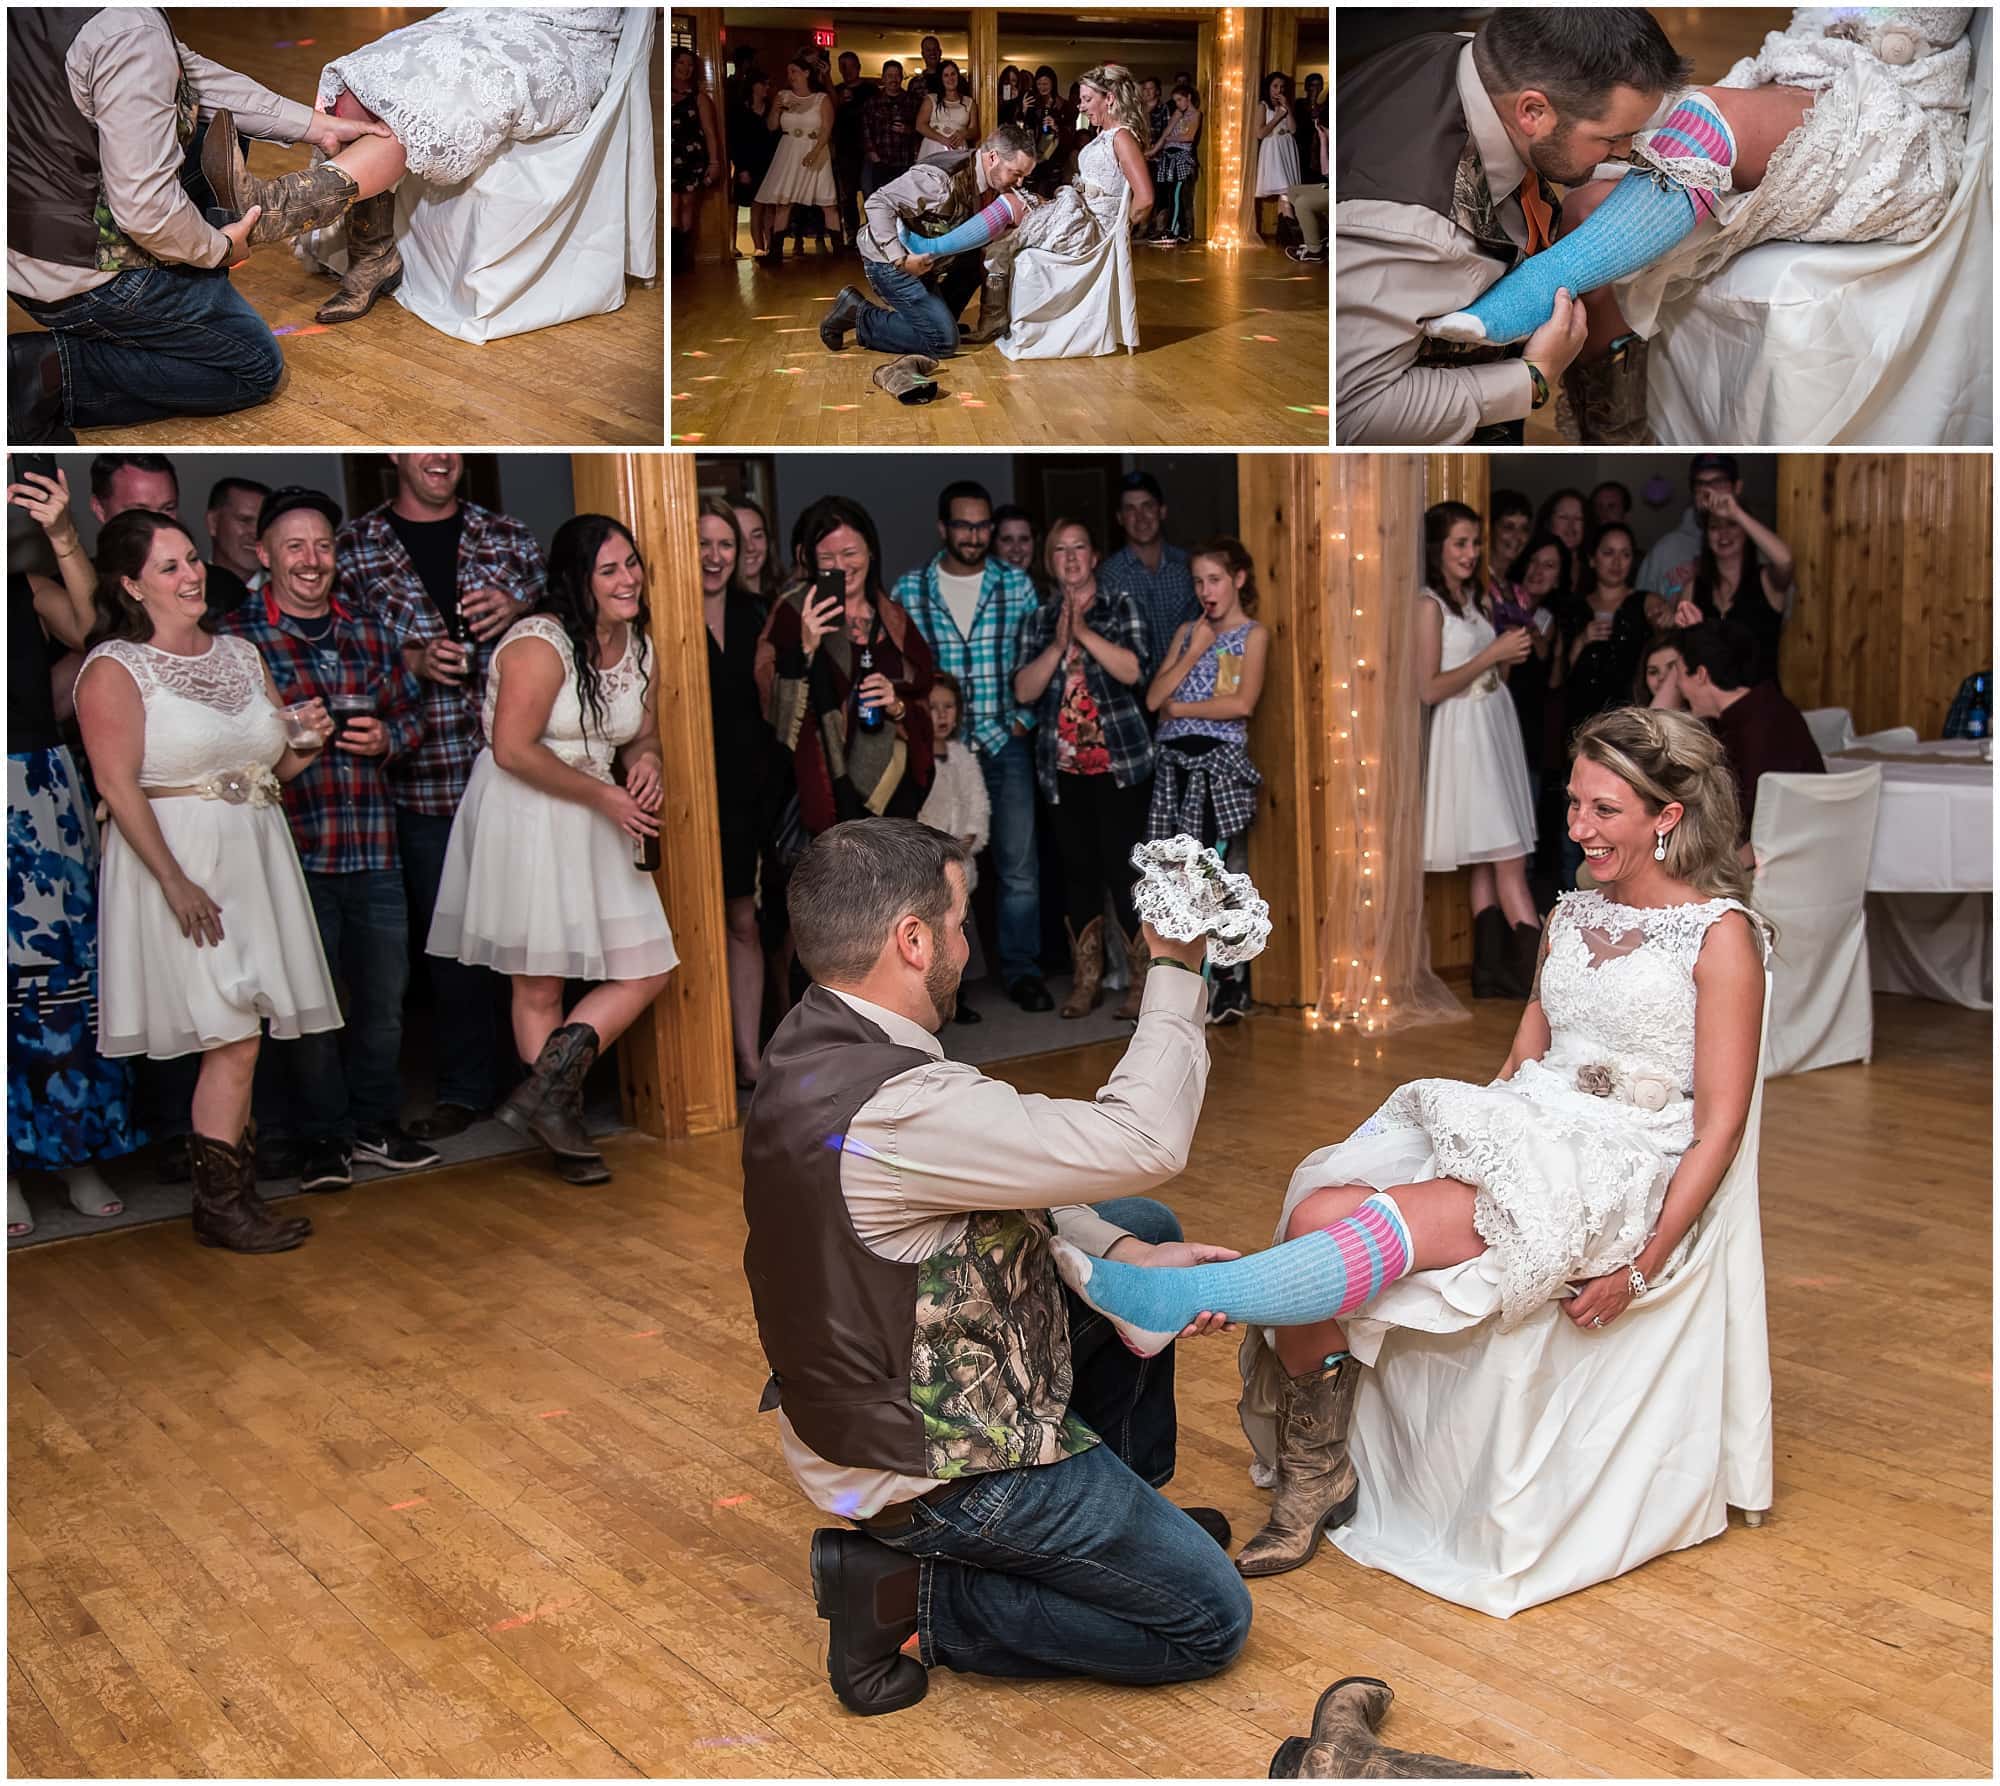 The groom takes of the bride's cowboy boots then grabs the garter off her leg during the garter toss.